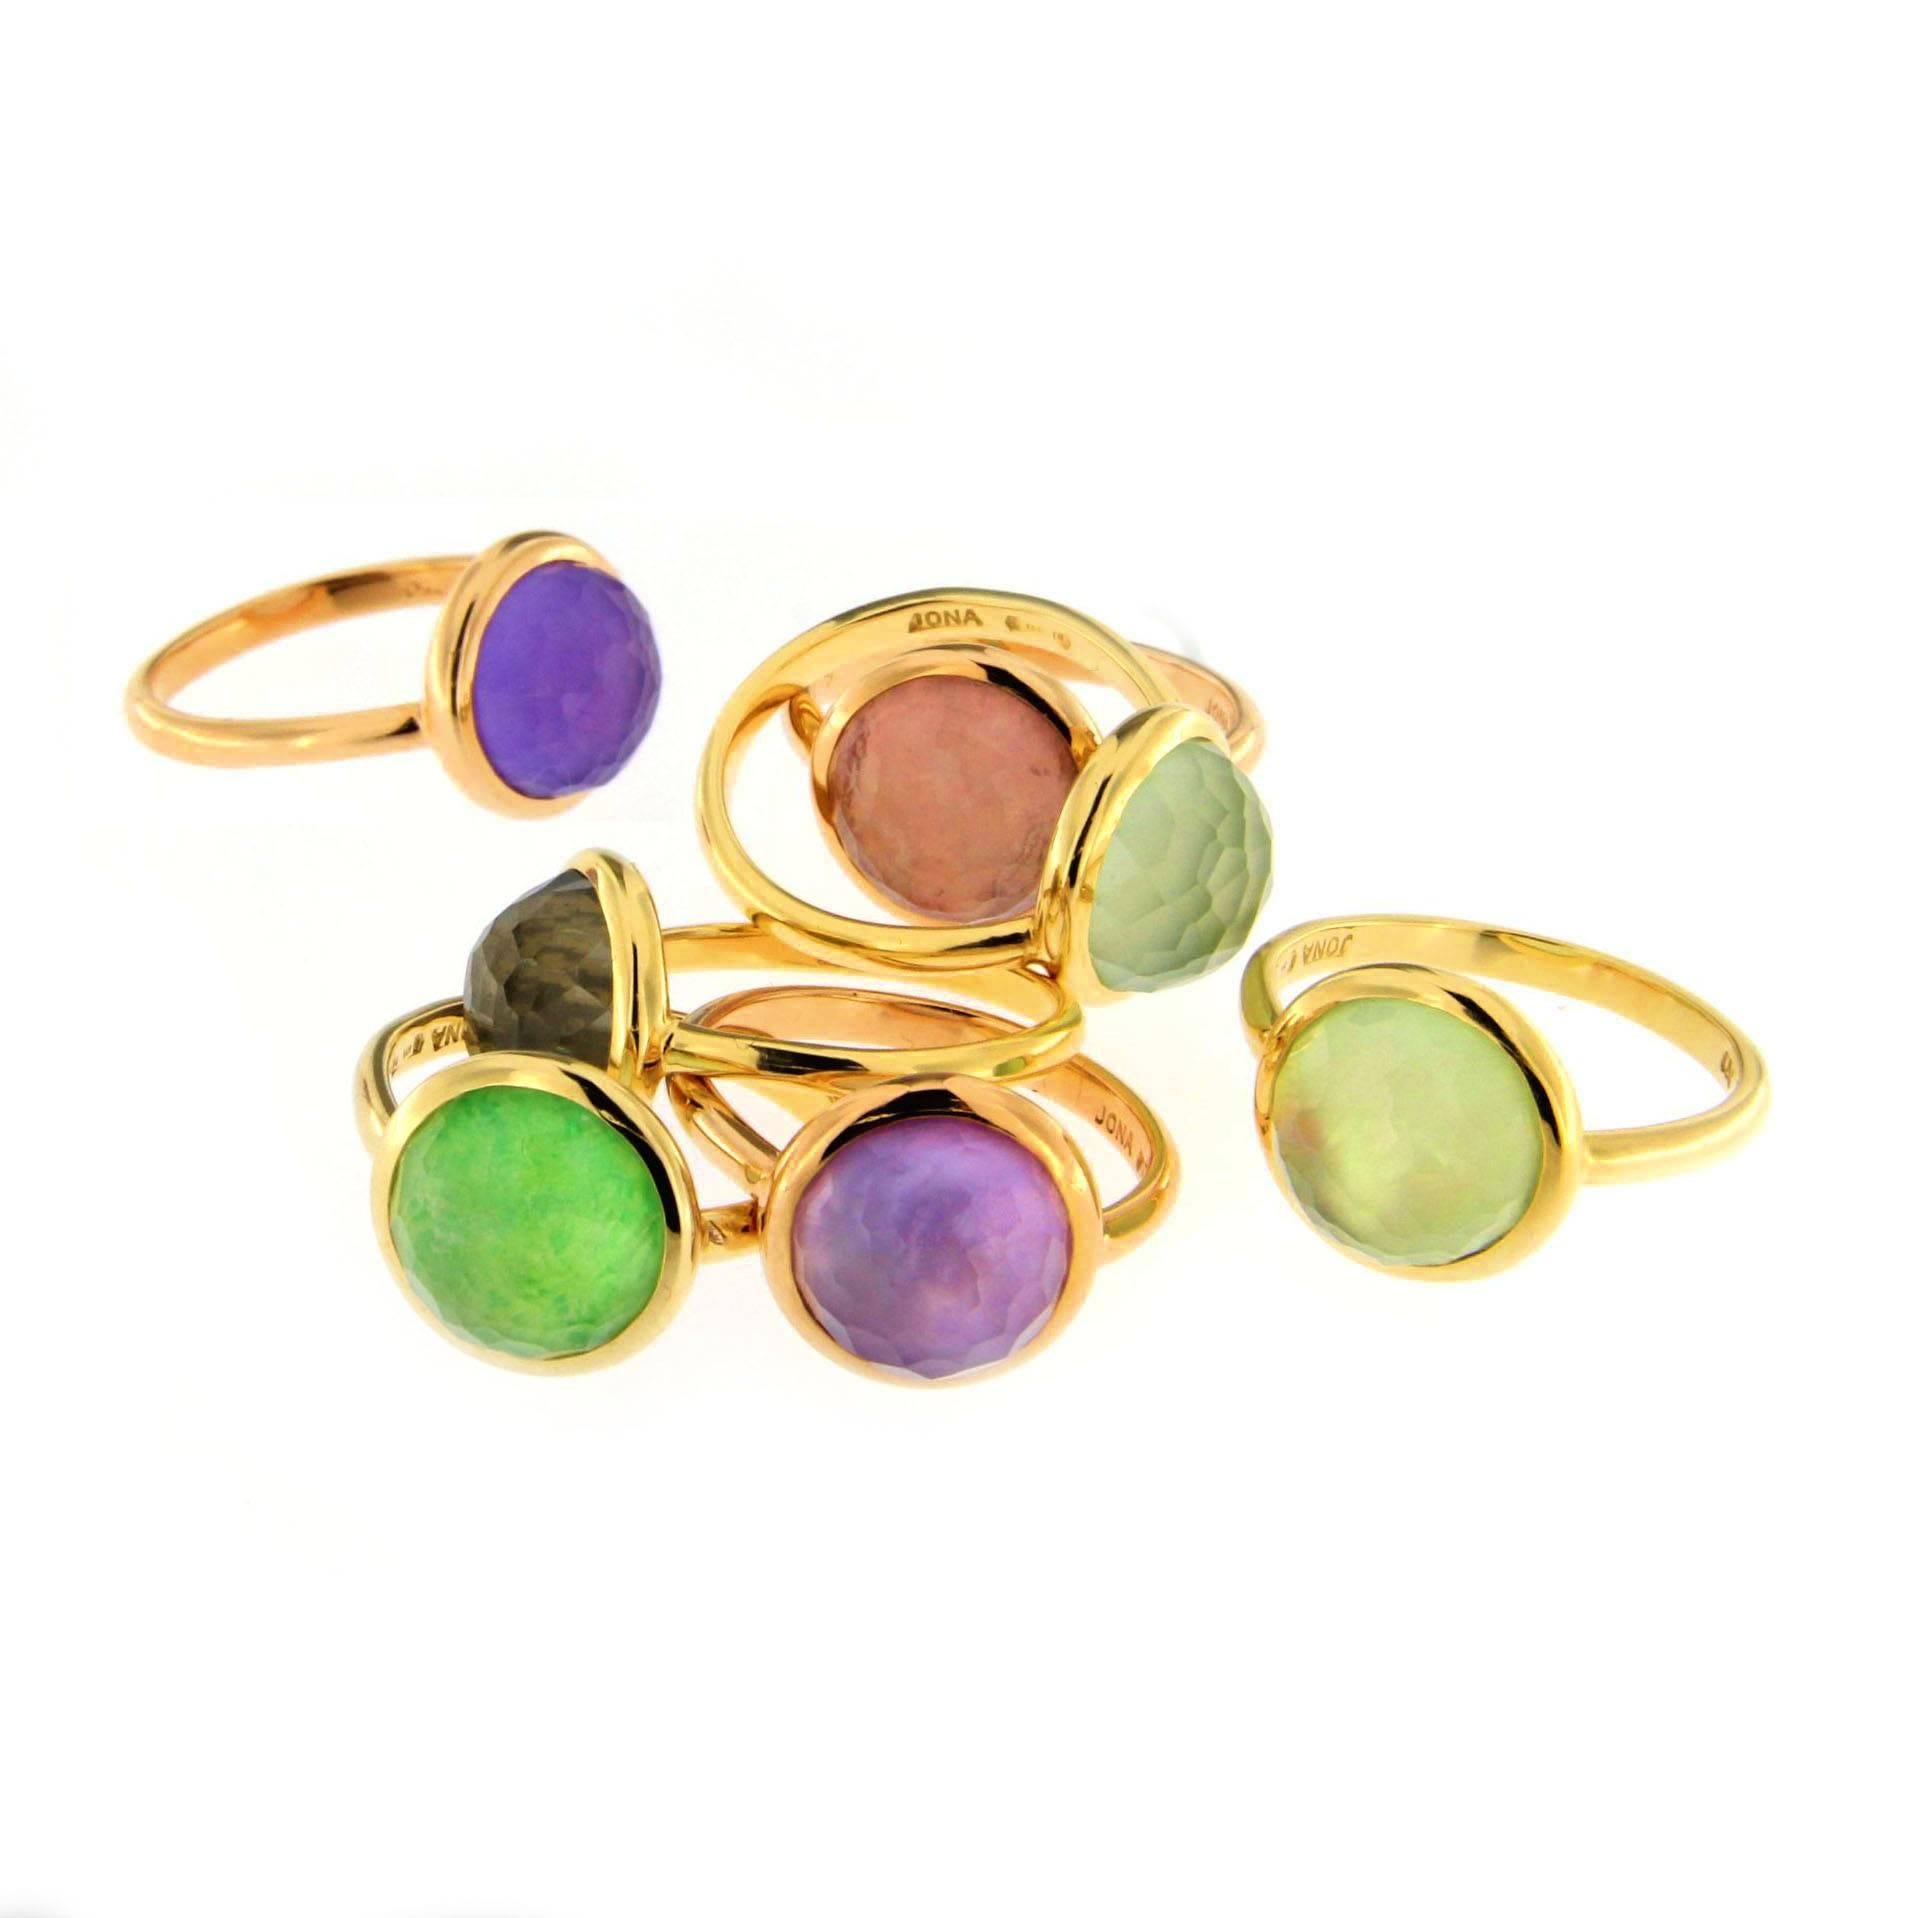 Jona design collection, hand crafted in Italy, 18 karat yellow gold faceted cocktail ring, set with a crazy cut rock crystal over Burmese Jade & mother of pearl. 
US size 6. Eu size 12. It can be sized to any specification.
The same design is